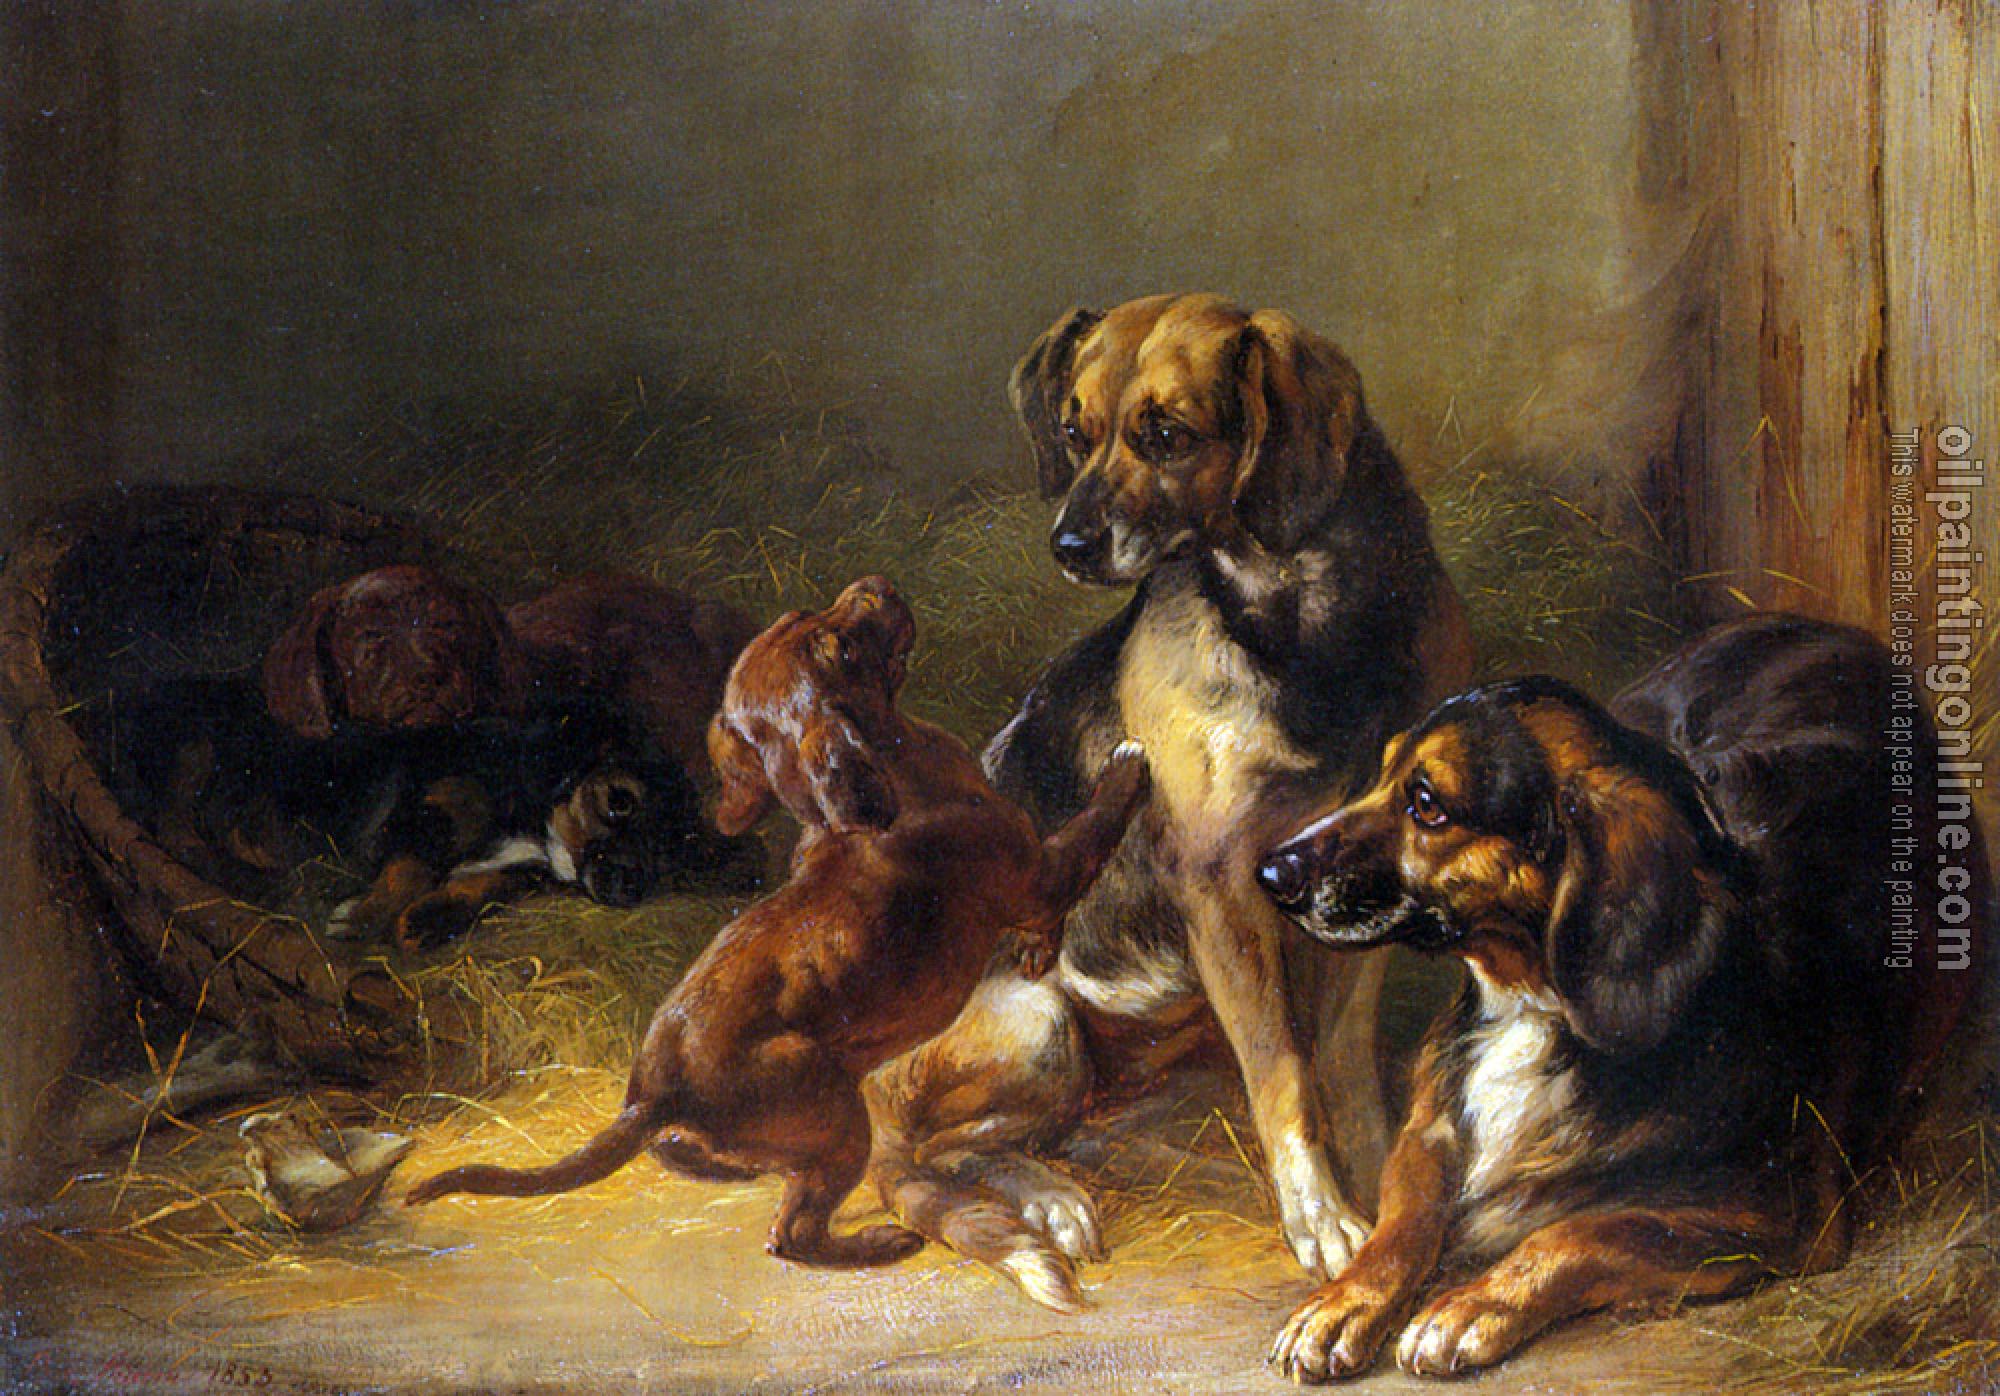 Adam, Benno - Dogs and Whelps